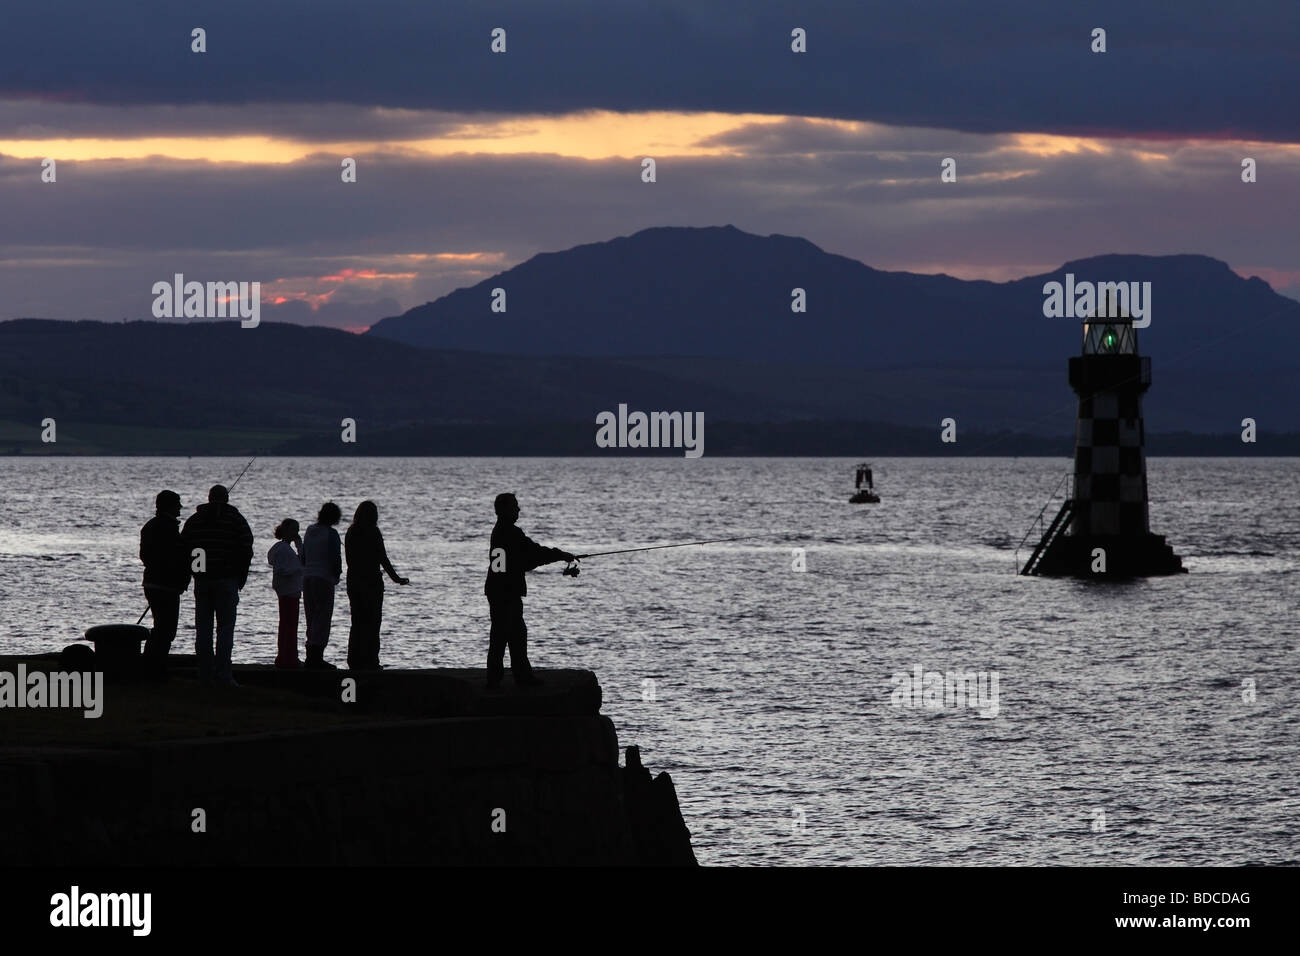 https://c8.alamy.com/comp/BDCDAG/group-of-people-fishing-at-sunset-on-the-firth-of-clyde-port-glasgow-BDCDAG.jpg